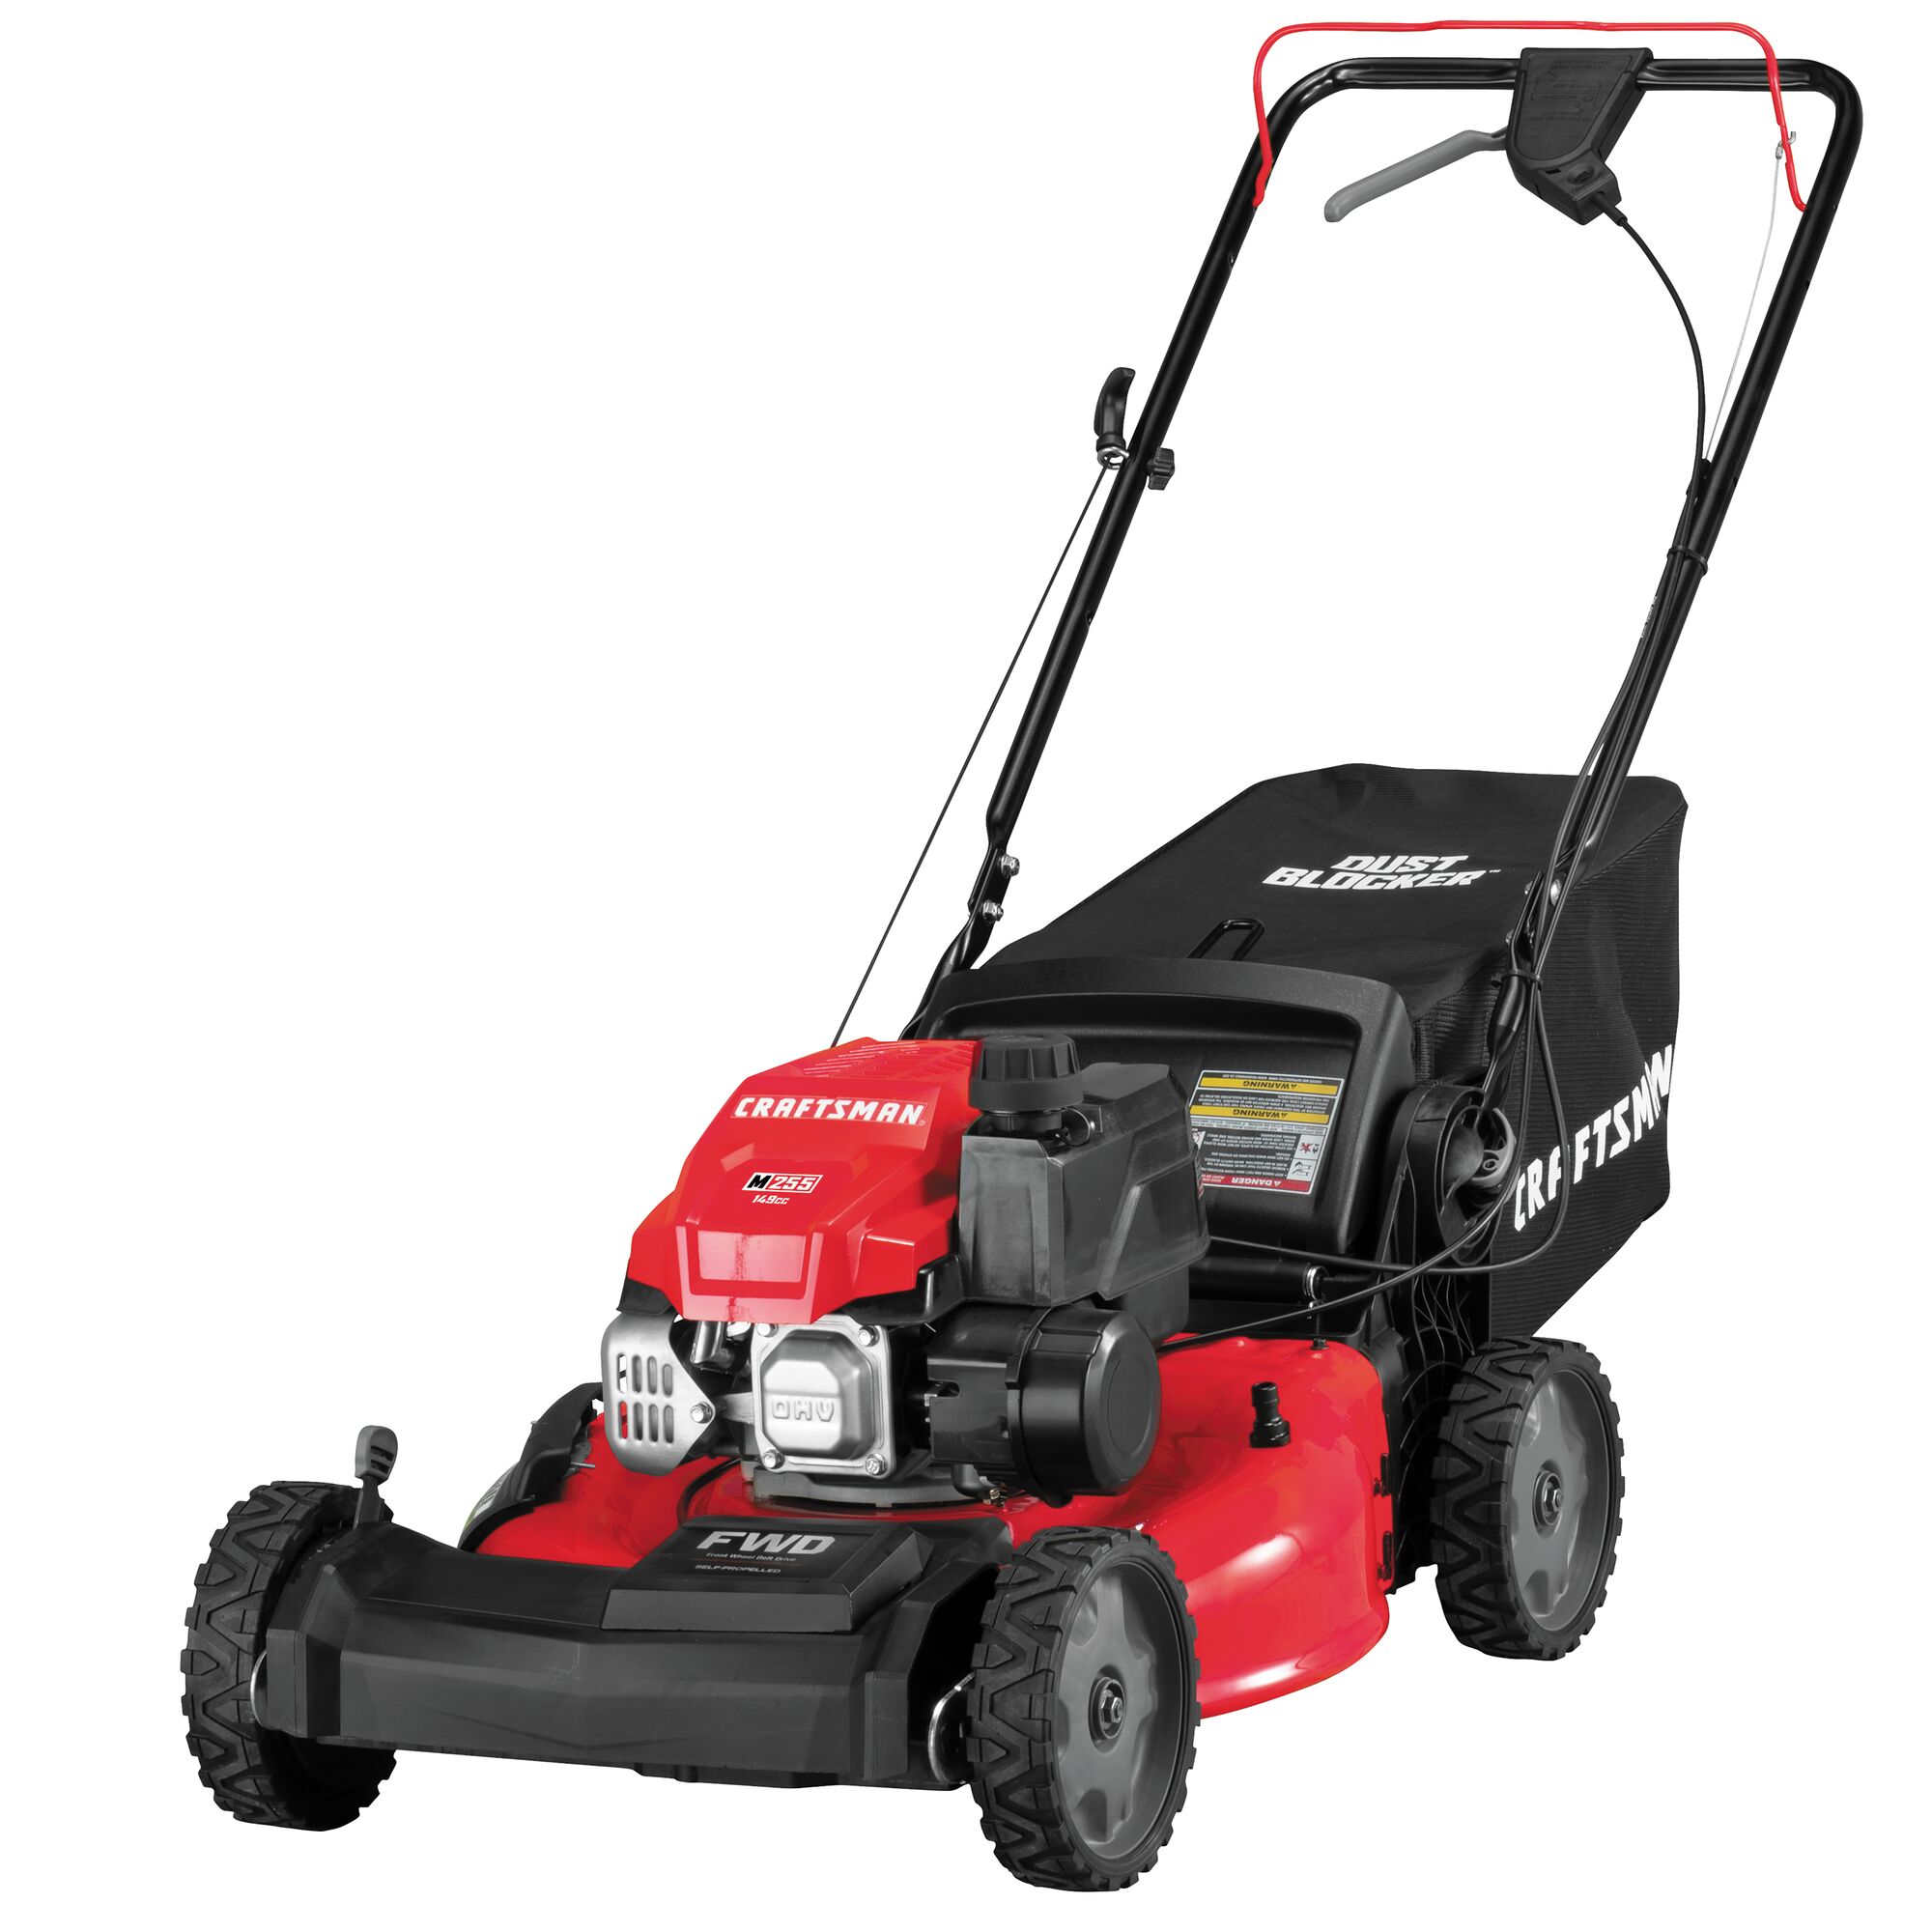 Left profile of 21 inch 149 c c front wheel drive self propelled lawn mower.